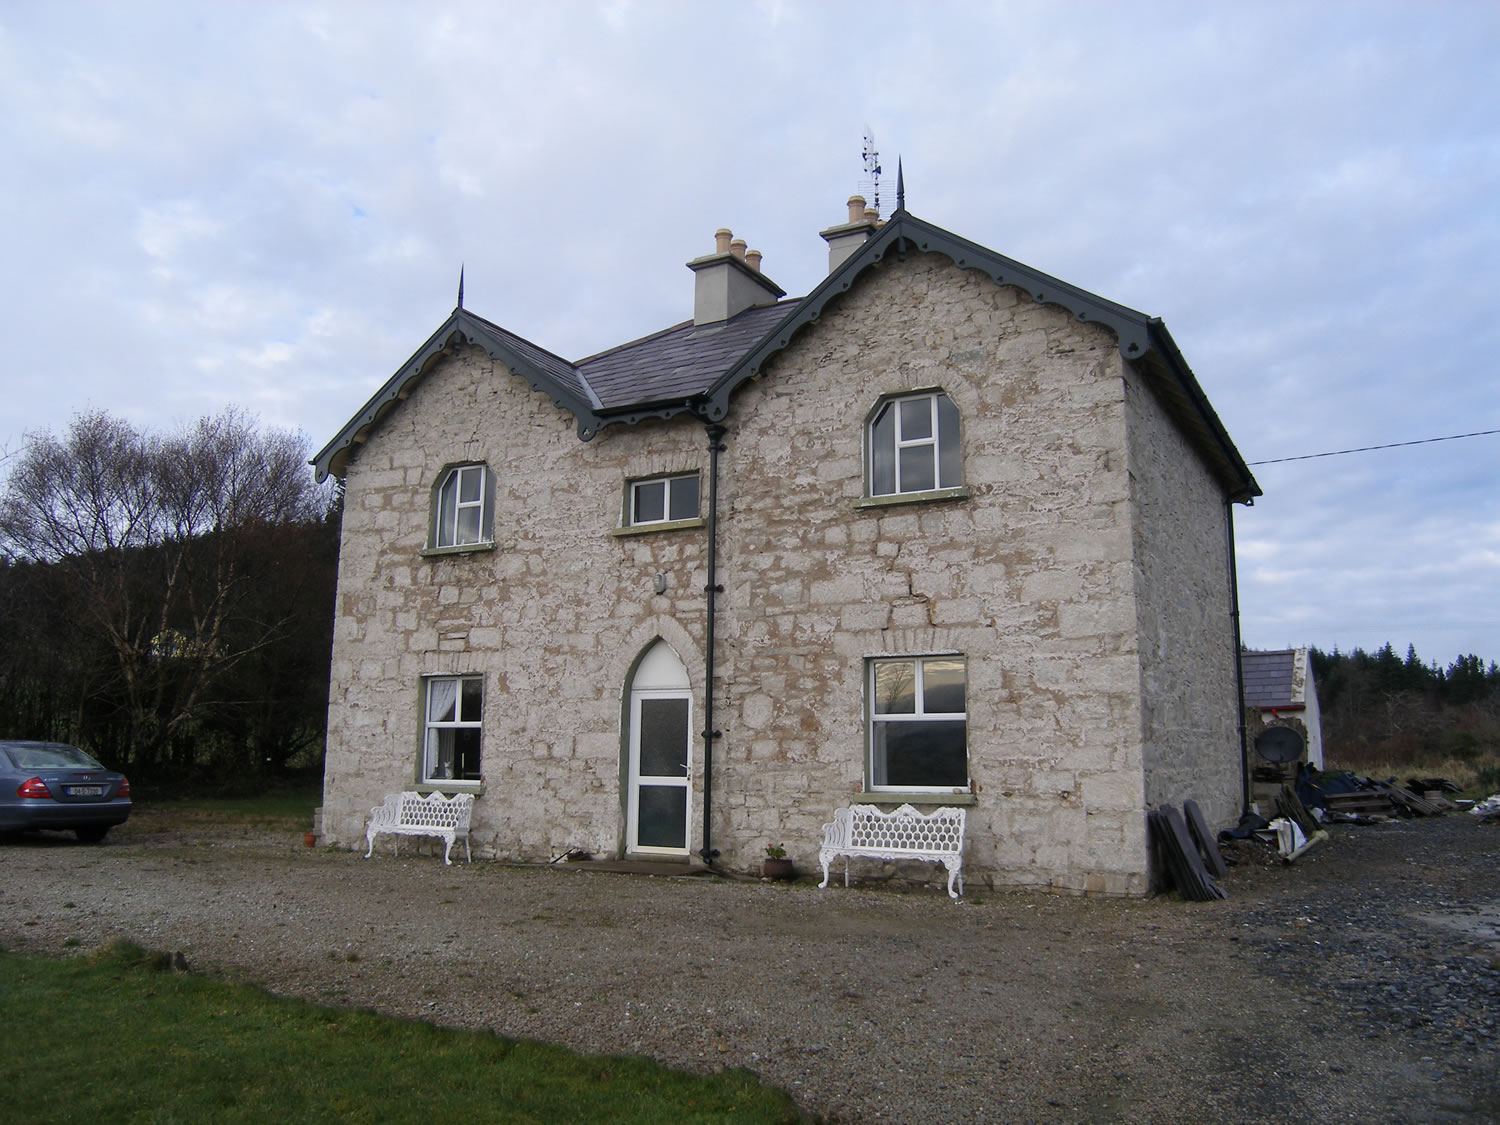 Early 19c Factors House At Ards, Co. Donegal